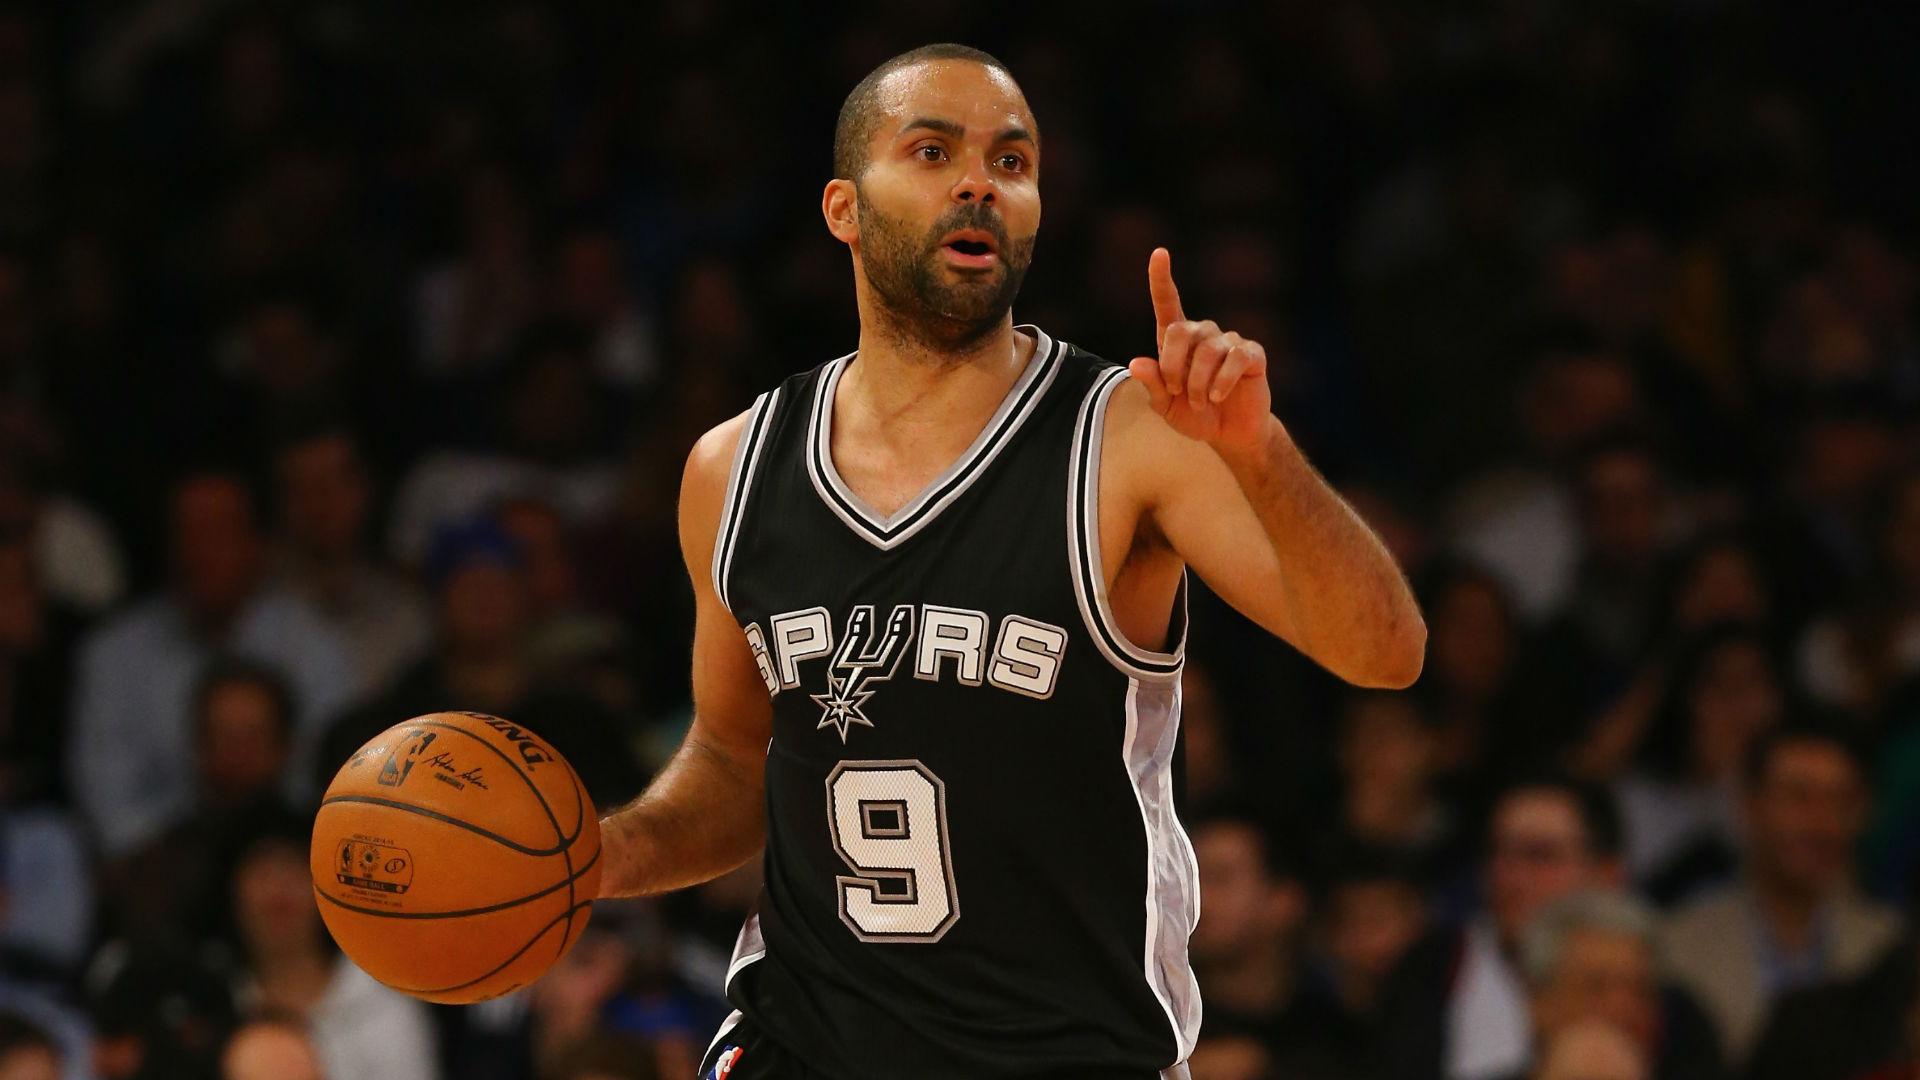 Tony Parker retires: Five Opta facts about point guard's NBA career